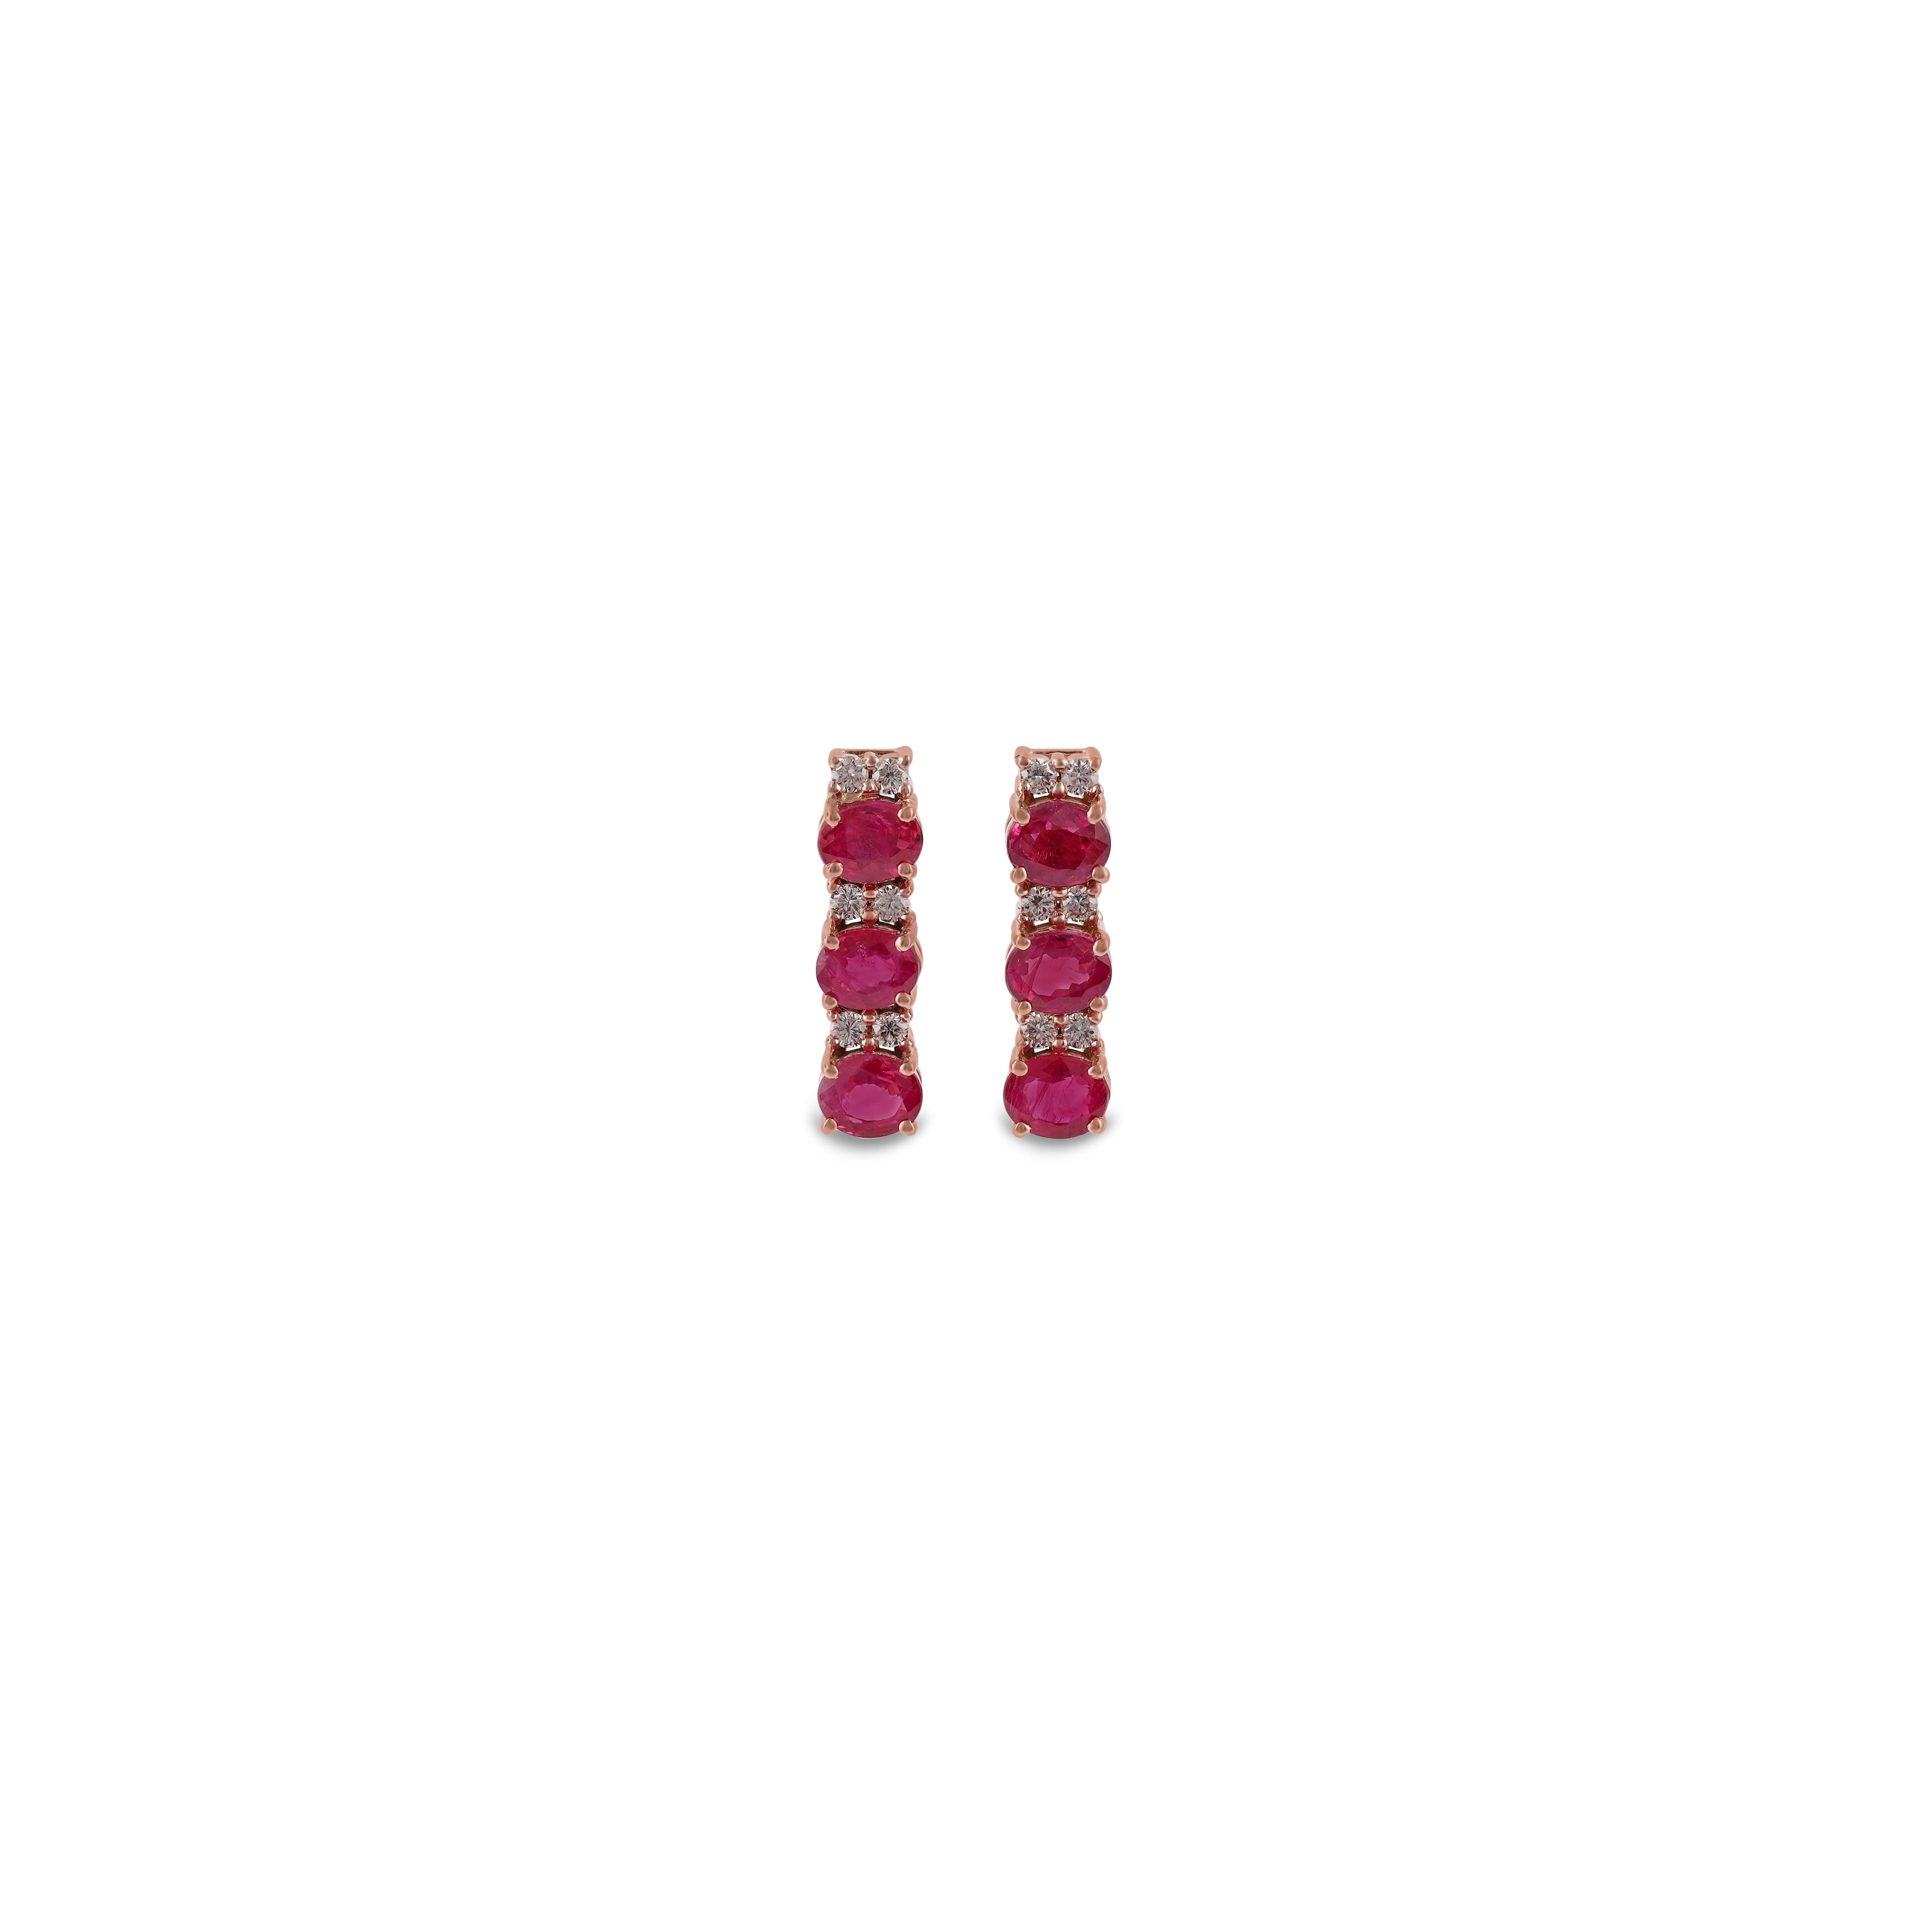 Magnificent Ruby and Diamond Earrings Studded in 18 Karat Rose Gold

These are an exclusive earrings with ruby & diamonds features 6 pieces of rubies weight 1.81 carats, surrounded with 12 pieces of diamonds weight 0.18carats, these entire earrings